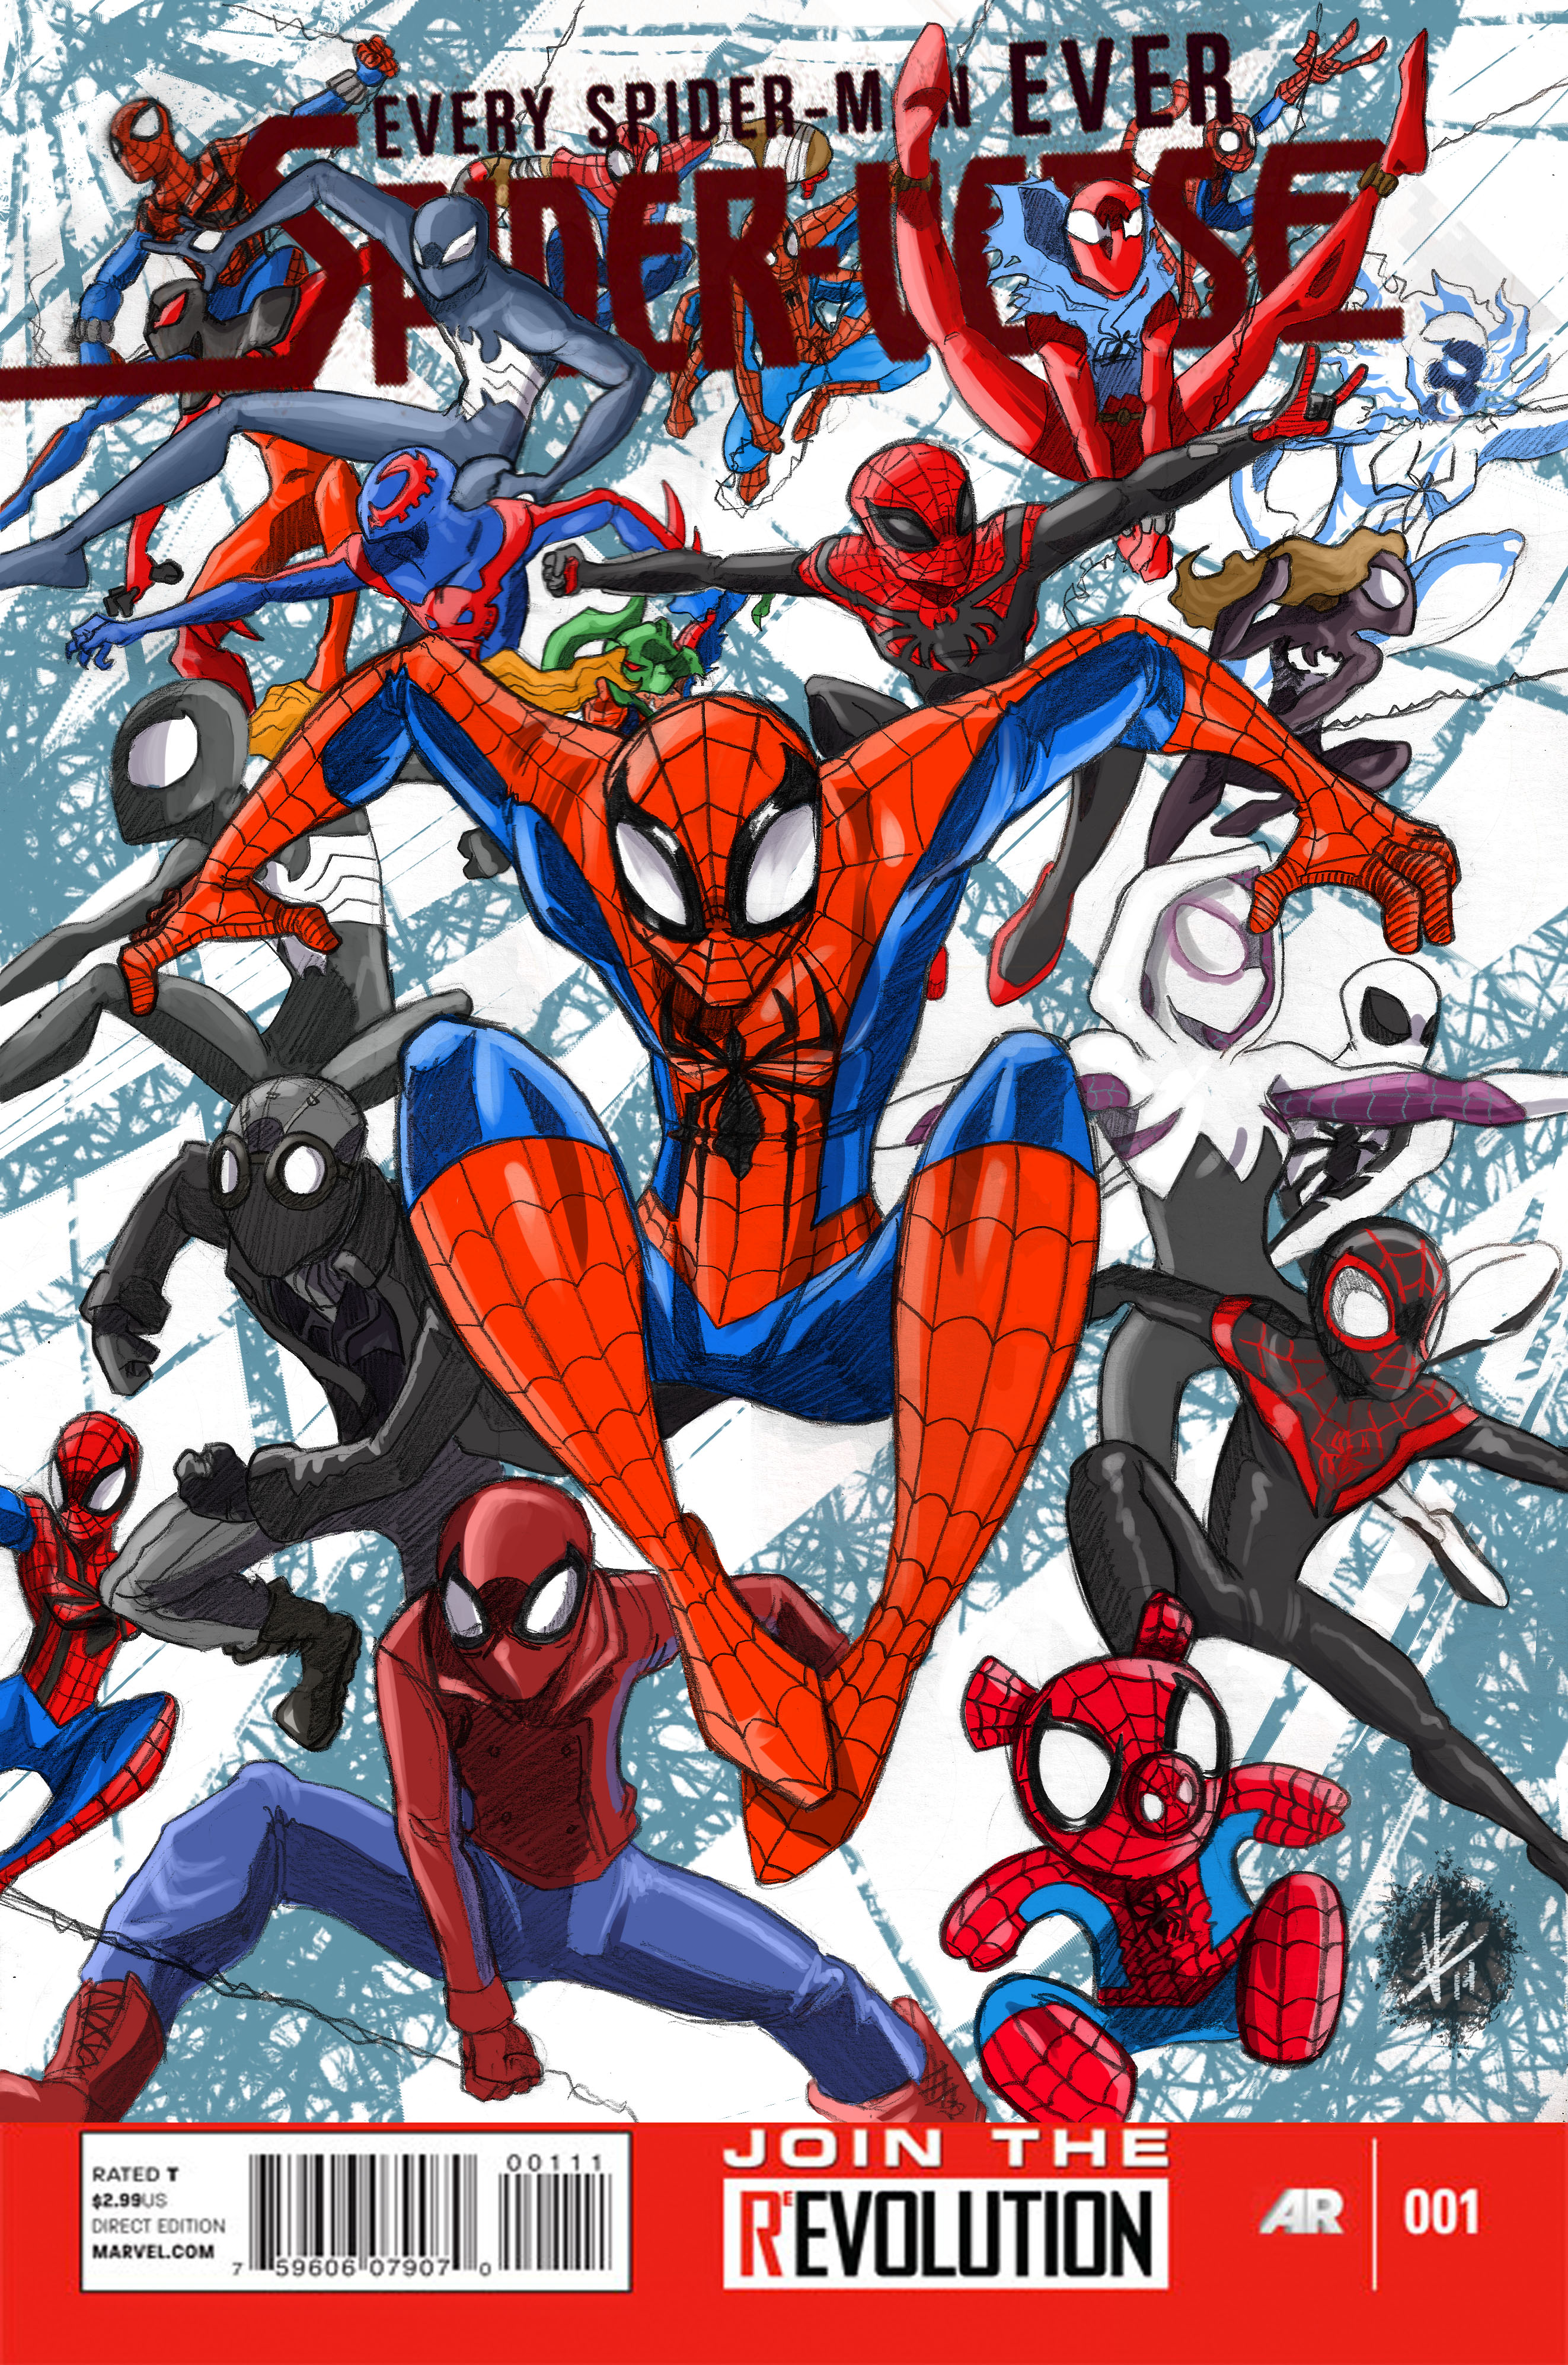 Nice wallpapers Spider-Verse 2645x3989px